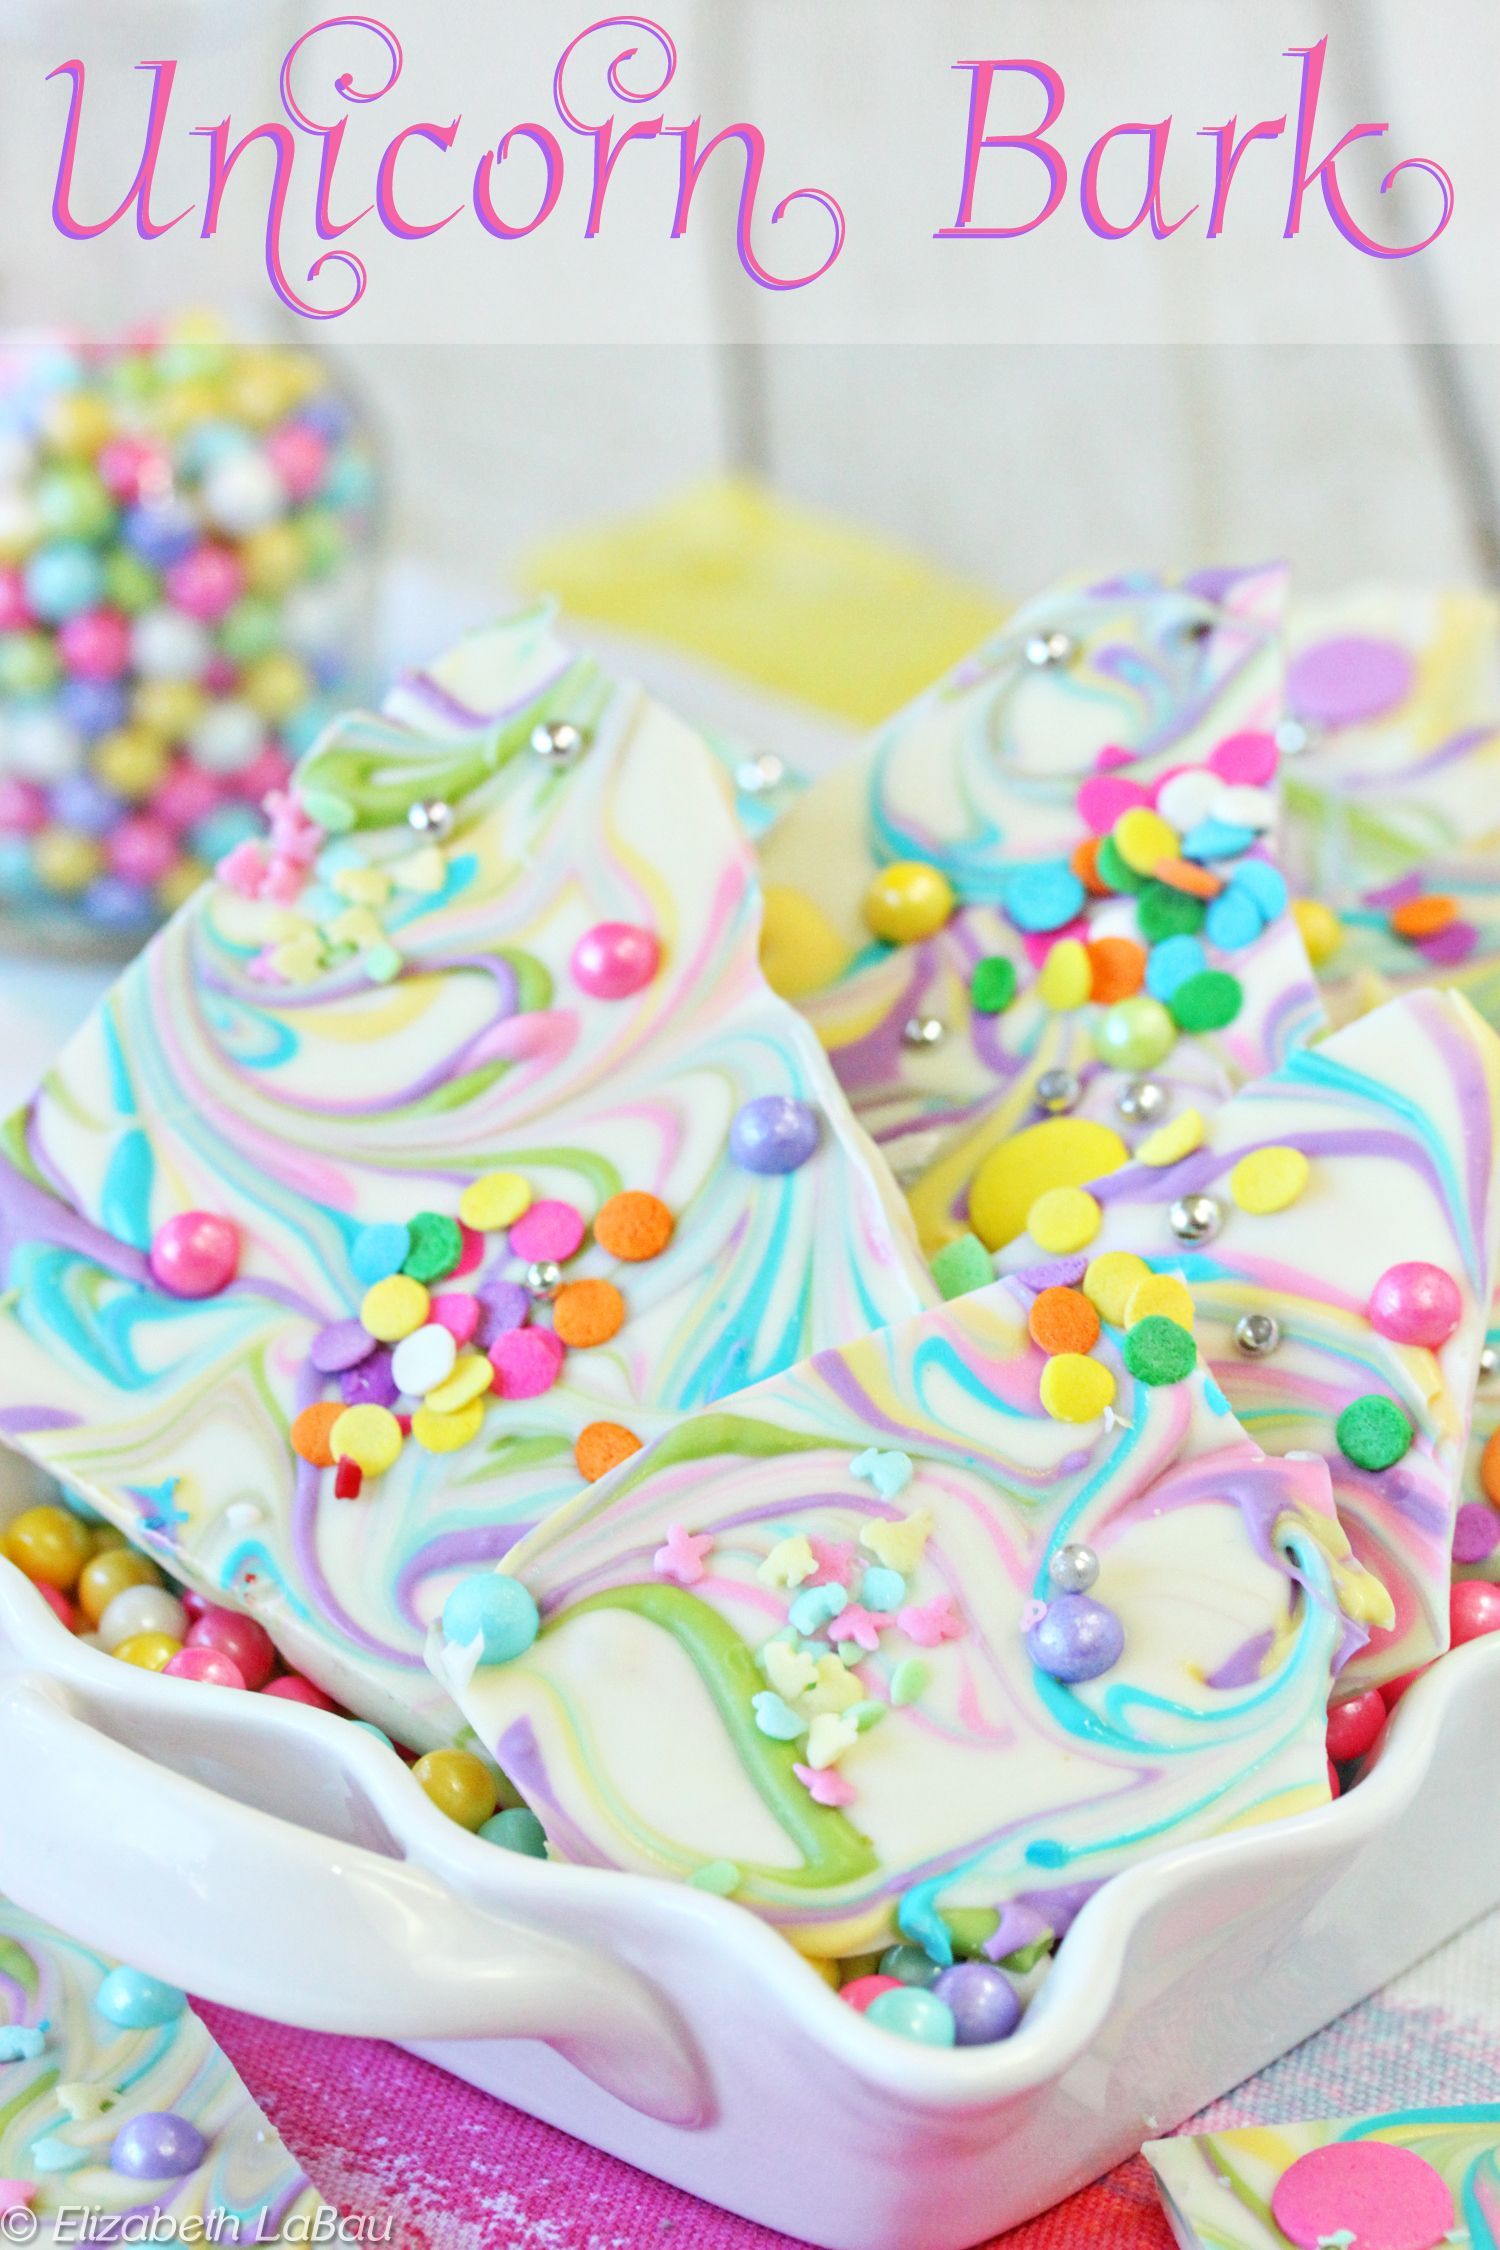 Unicorn Bark: a fun and sparkly bark with pastel swirls, sprinkles, and candy beads. | From candy.about.com